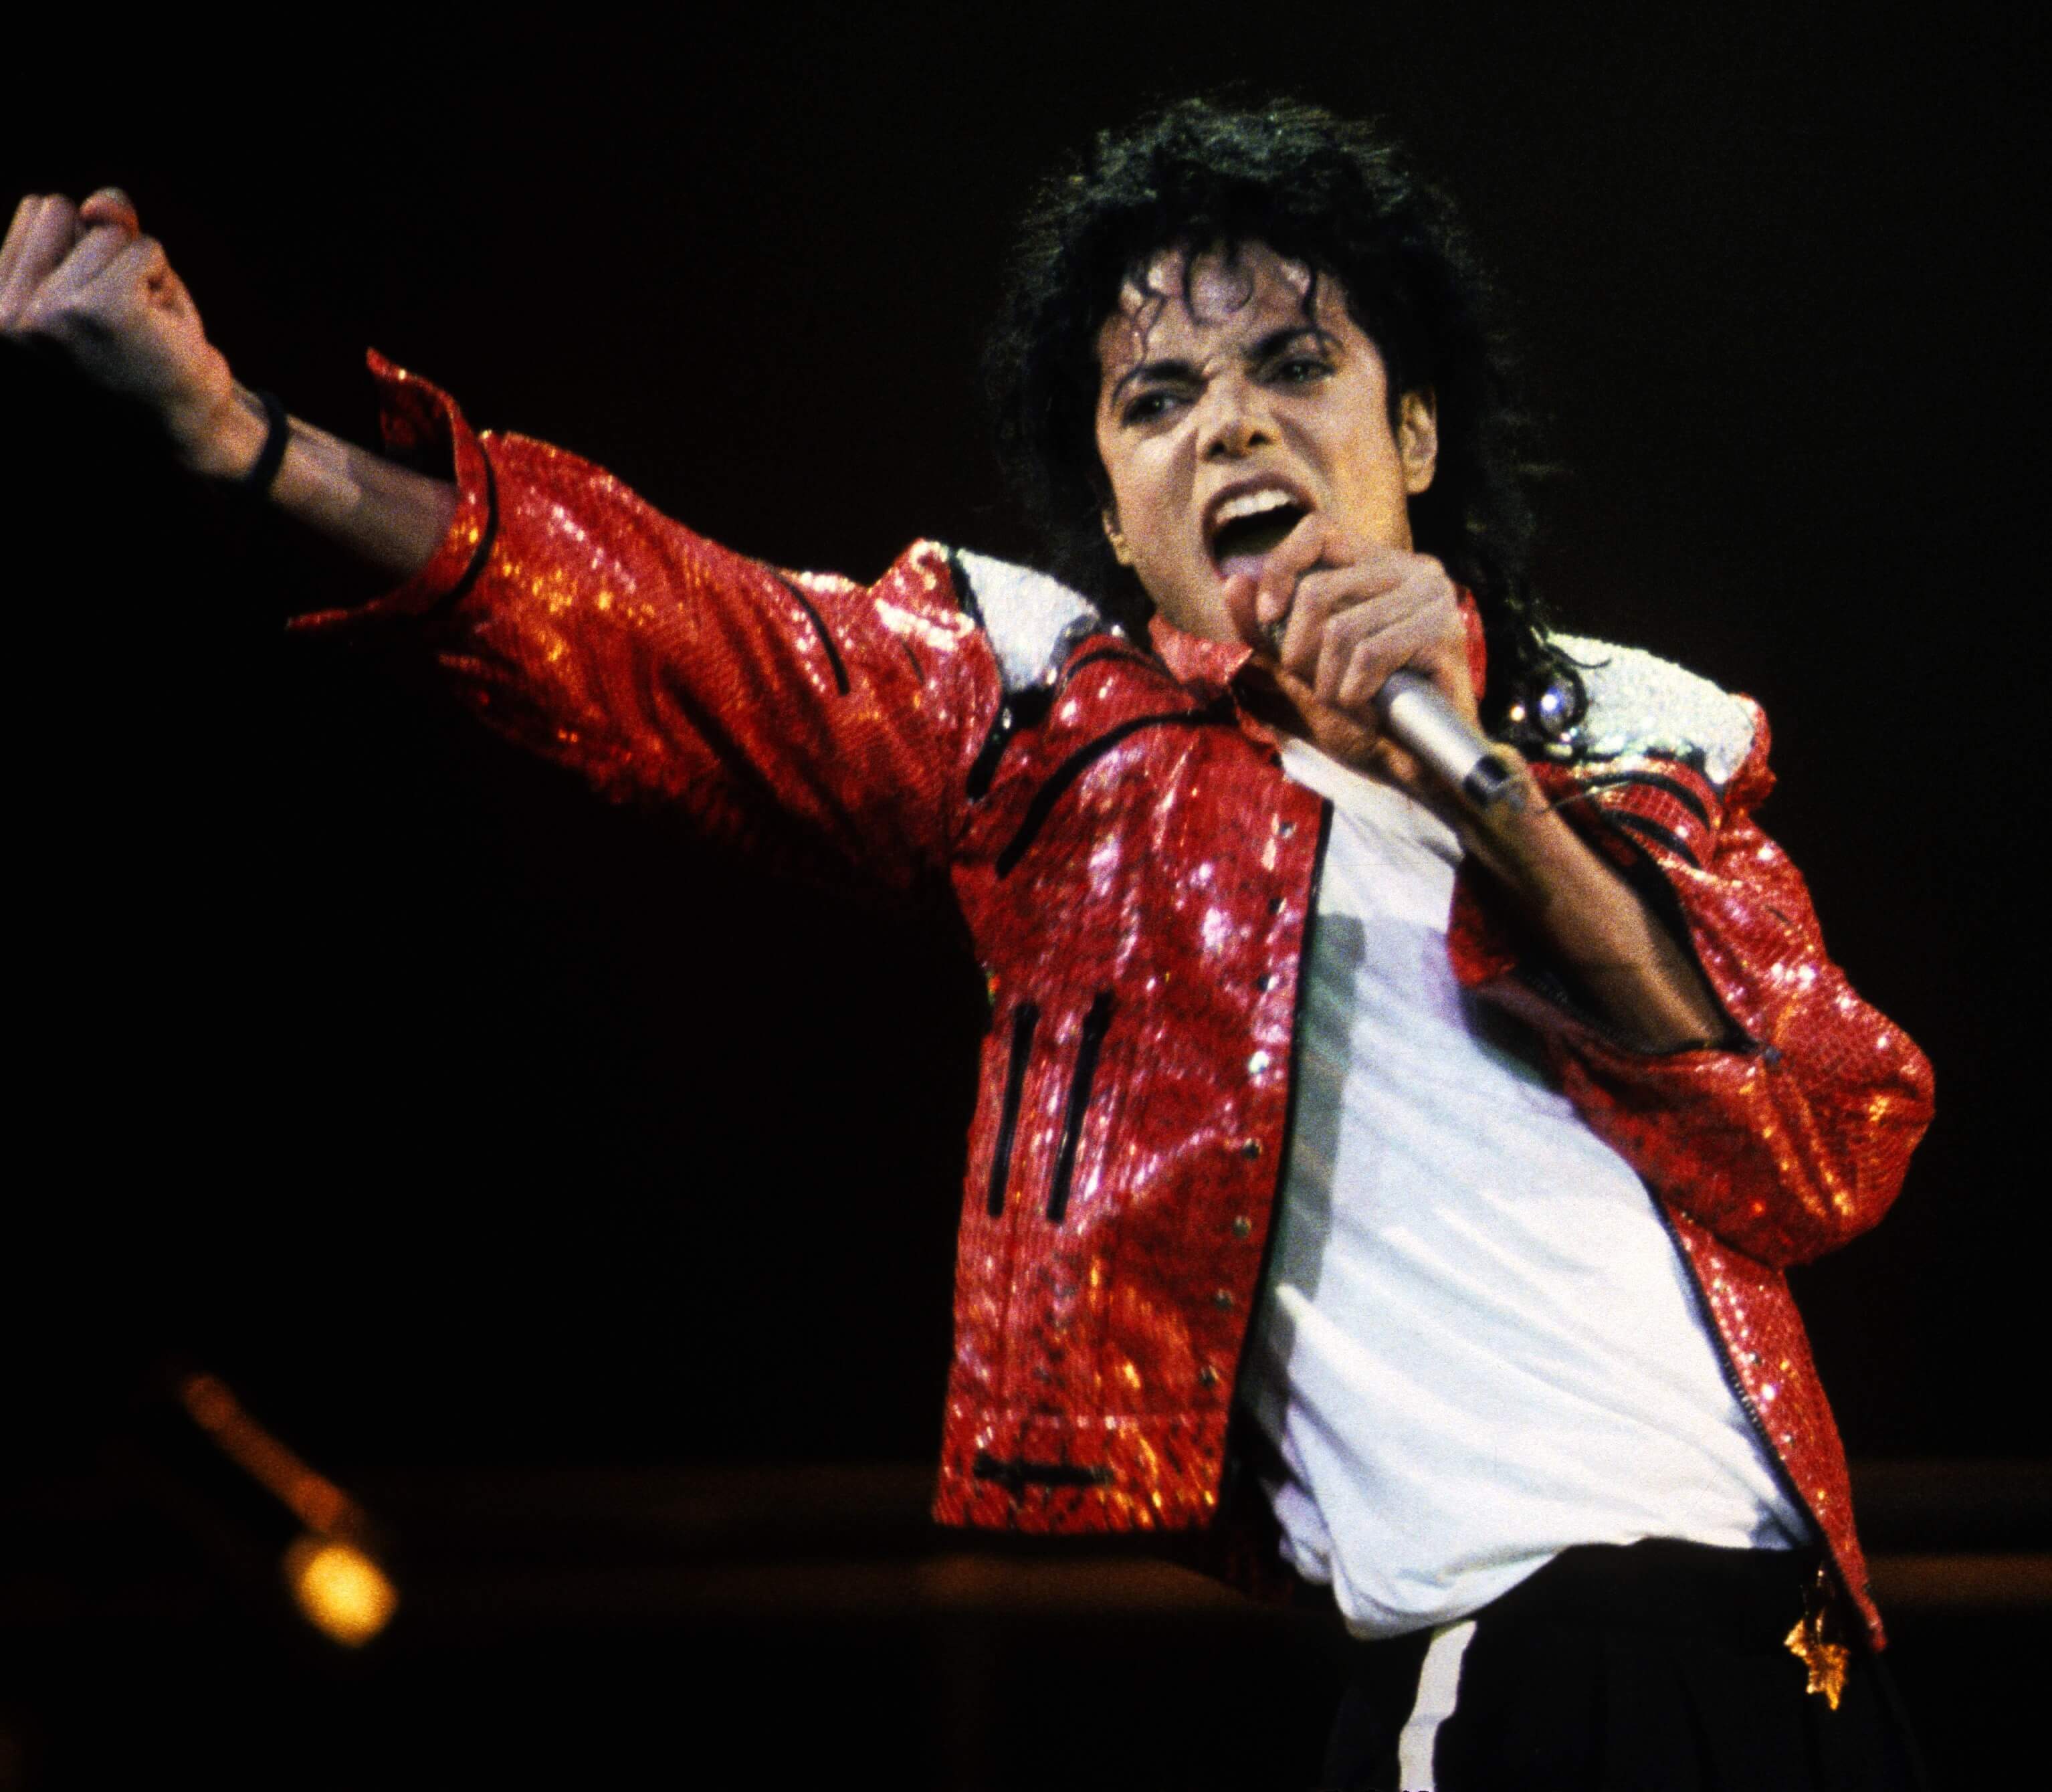 "Beat It" singer Michael Jackson in a red jacket